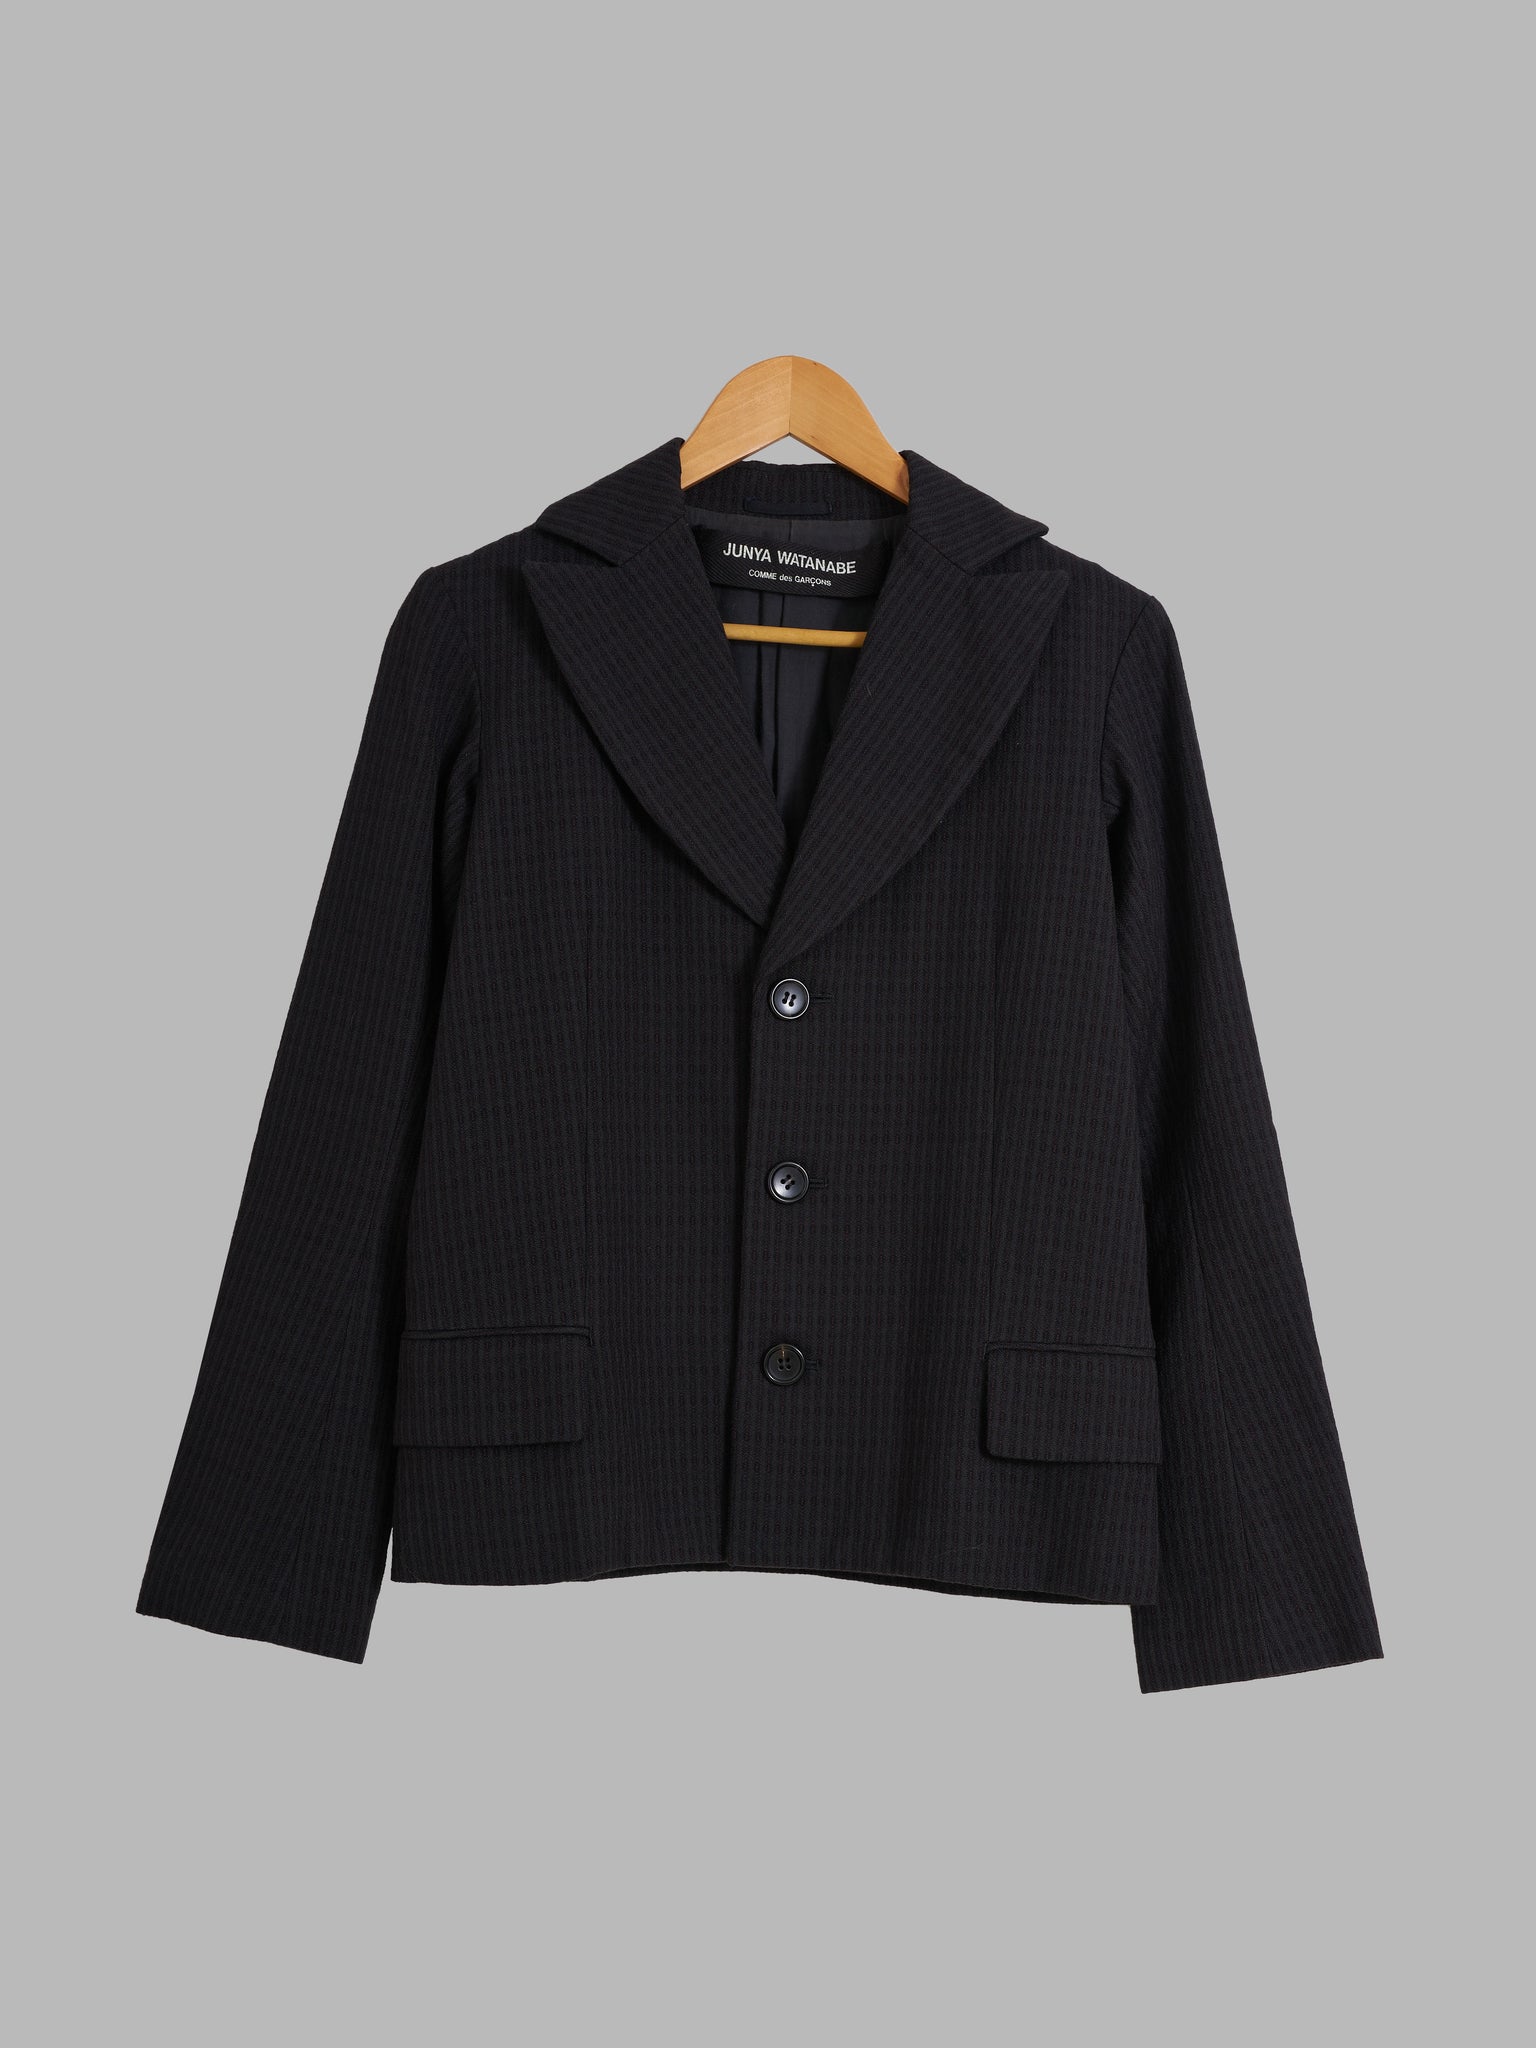 Junya Watanabe Comme des Garcons AW1996 black exaggerated lapel blazer - S M